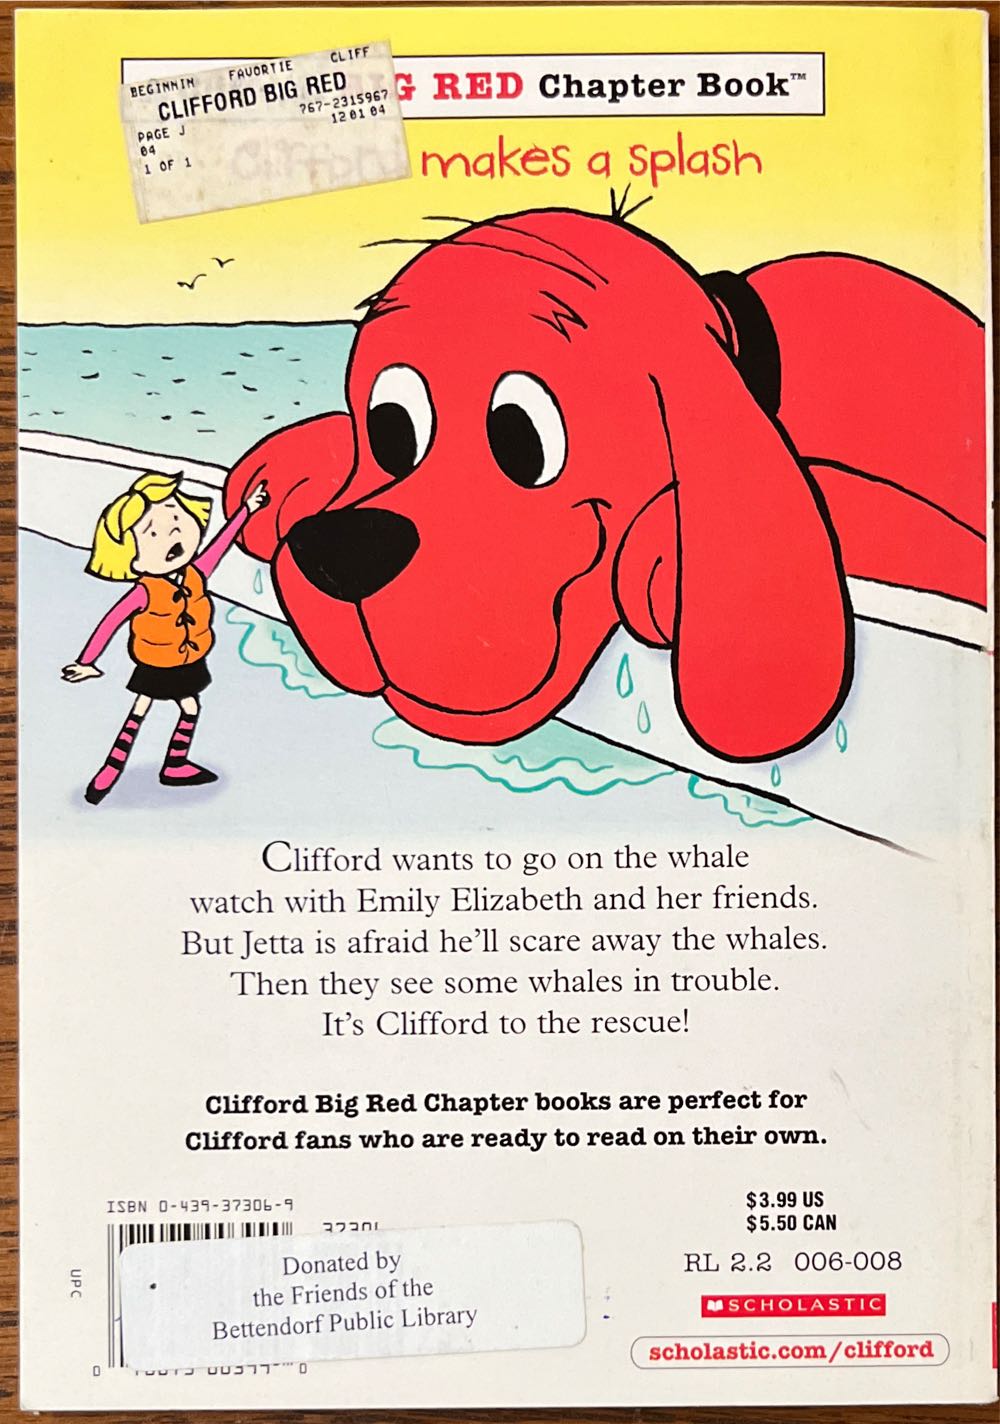 CLIFFORD #04 Saves The Whales - Carolyn Bracken (Scholastic - Paperback) book collectible [Barcode 9780439373067] - Main Image 2